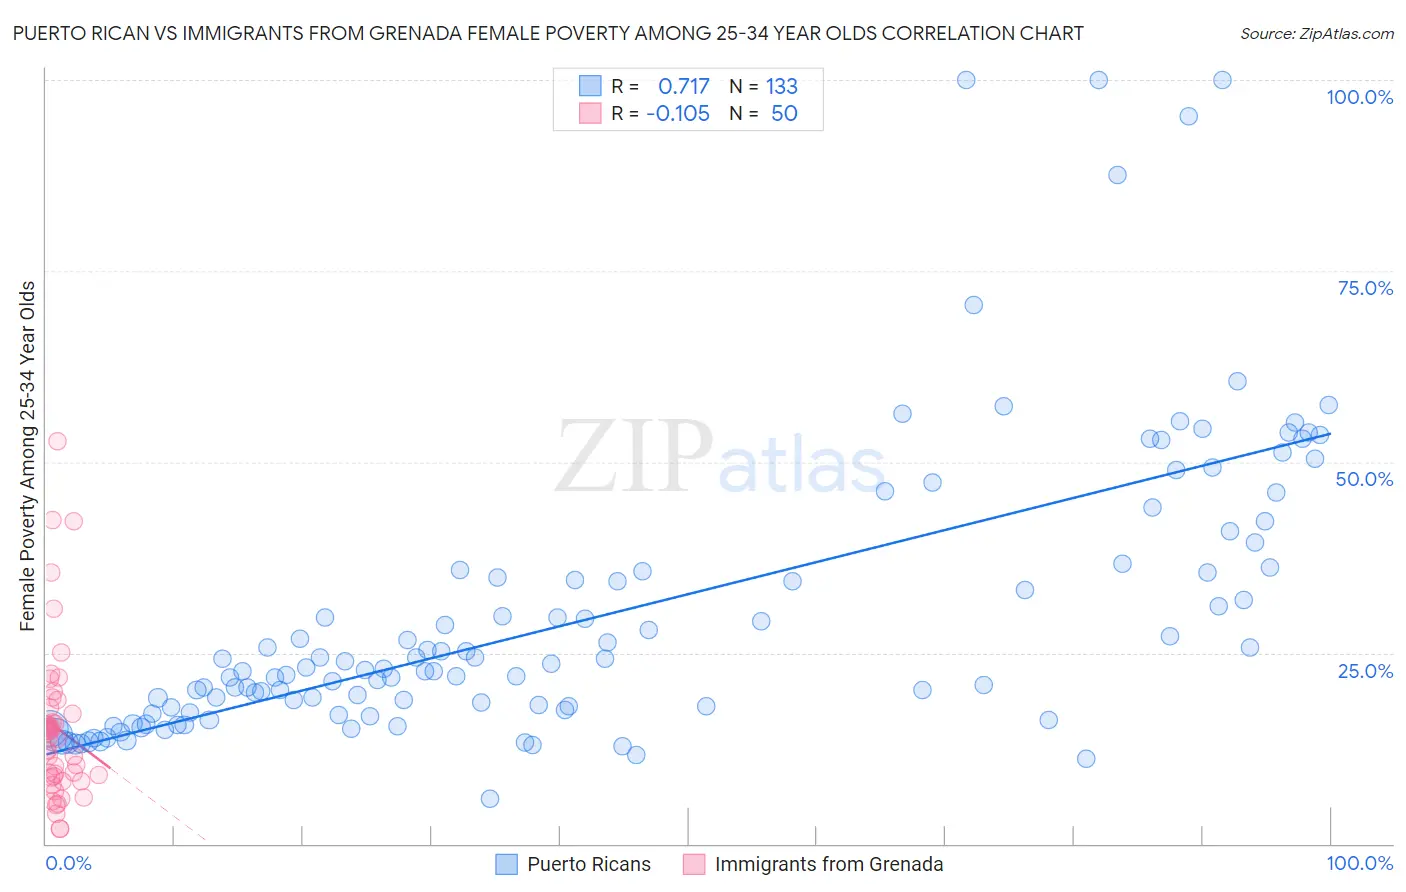 Puerto Rican vs Immigrants from Grenada Female Poverty Among 25-34 Year Olds